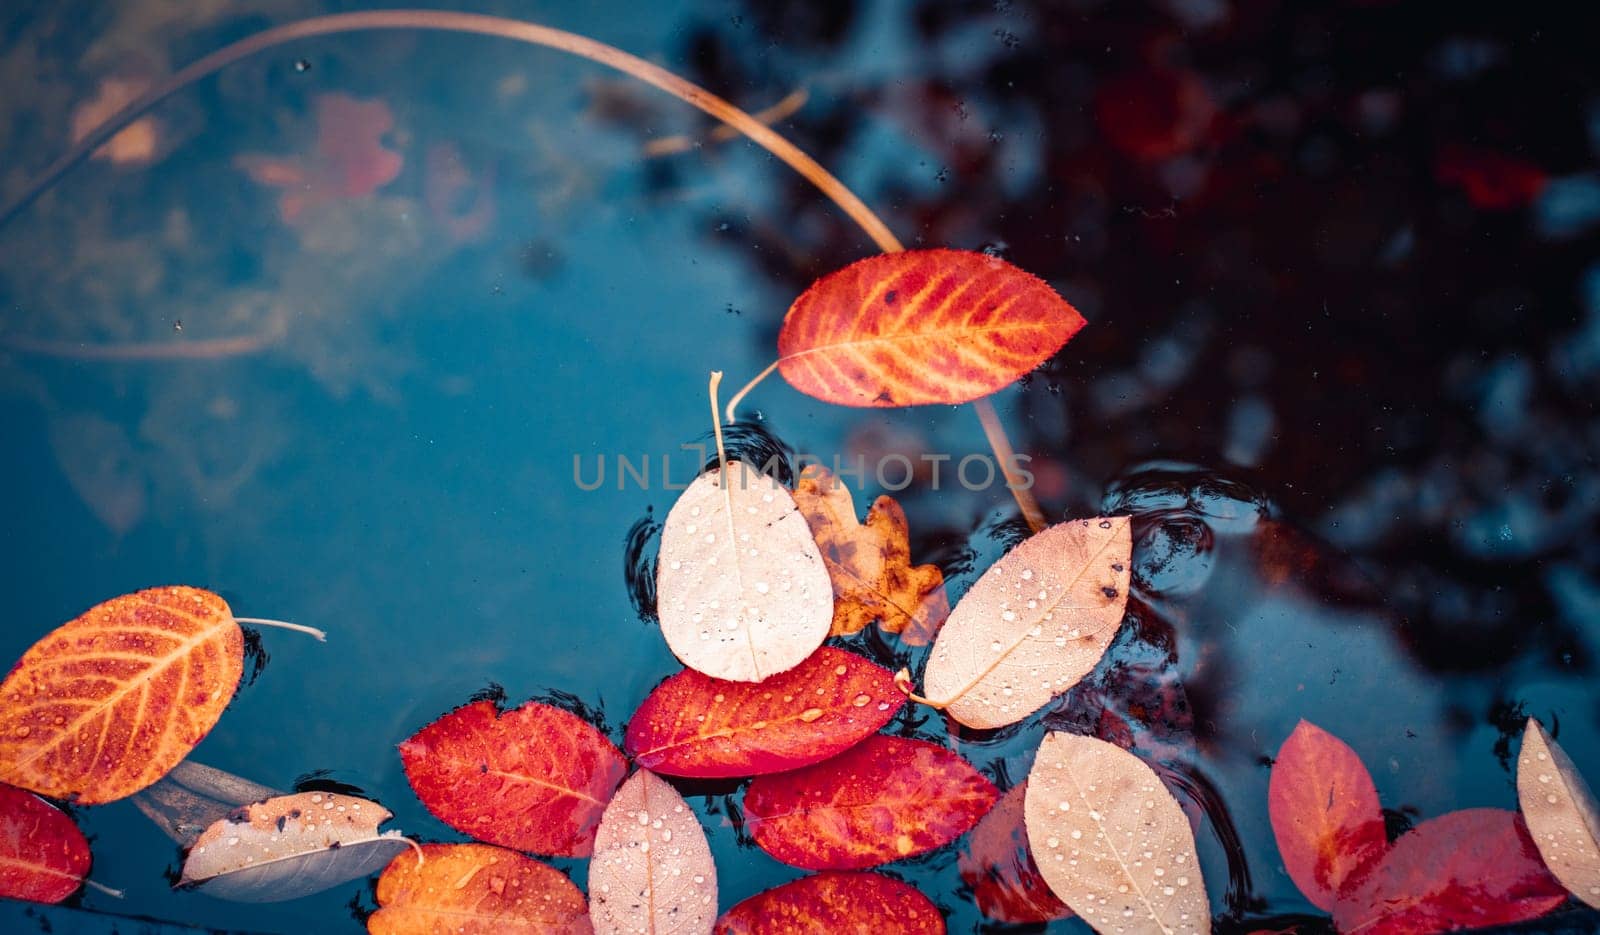 Autumnal bright yellow-orange fallen leaves in water concept photo. Symbol of fall season. by _Nataly_Nati_